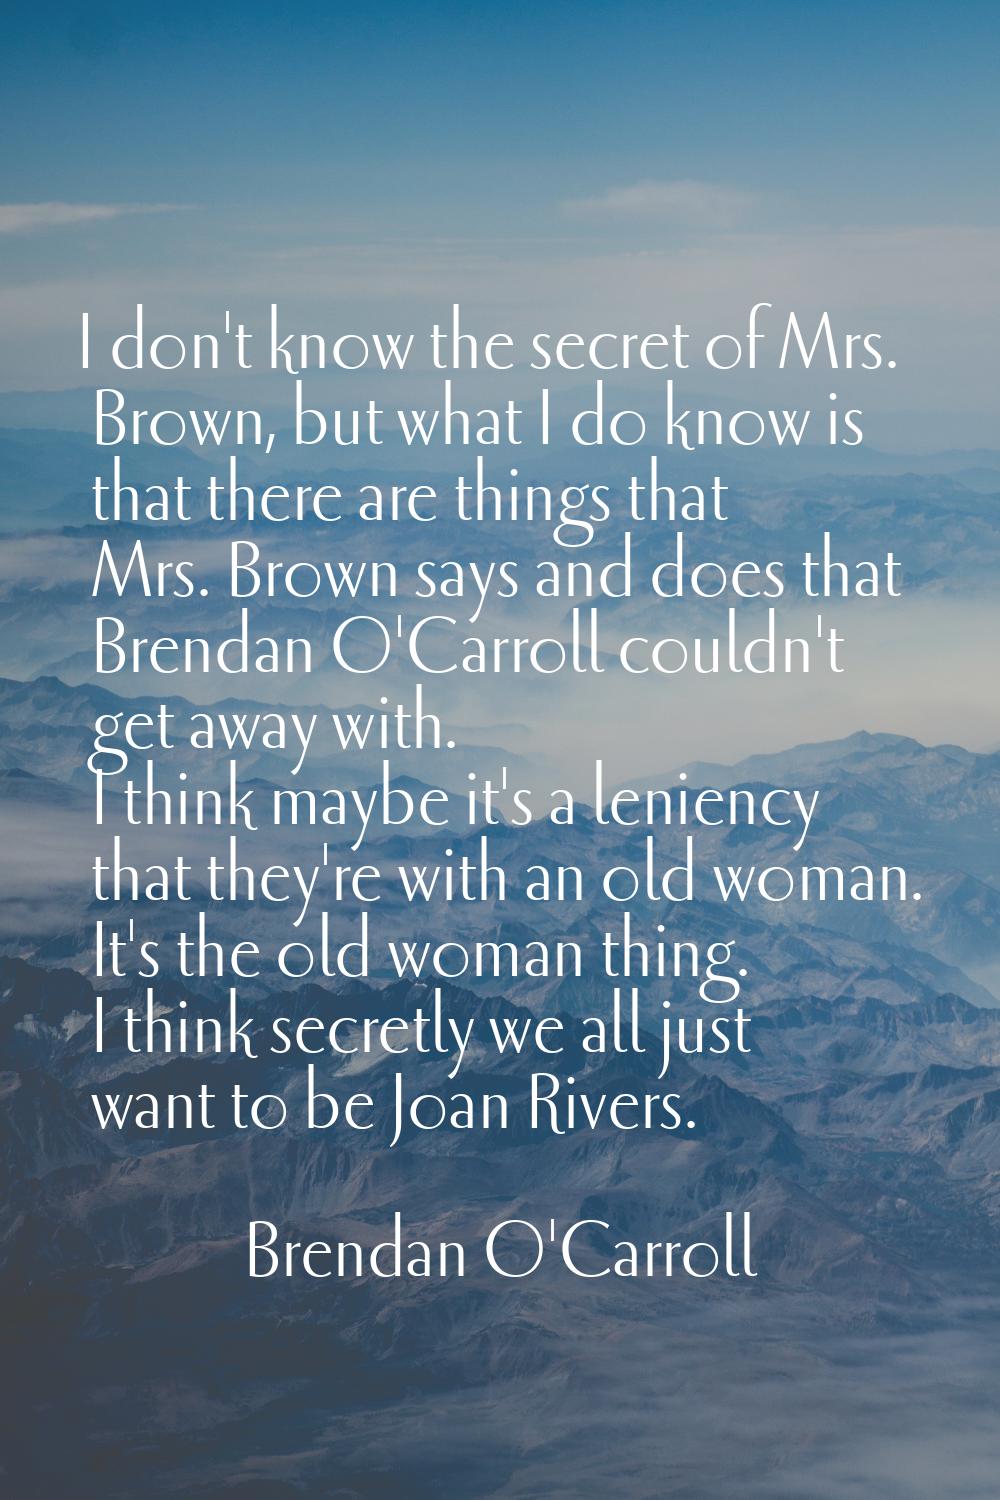 I don't know the secret of Mrs. Brown, but what I do know is that there are things that Mrs. Brown 